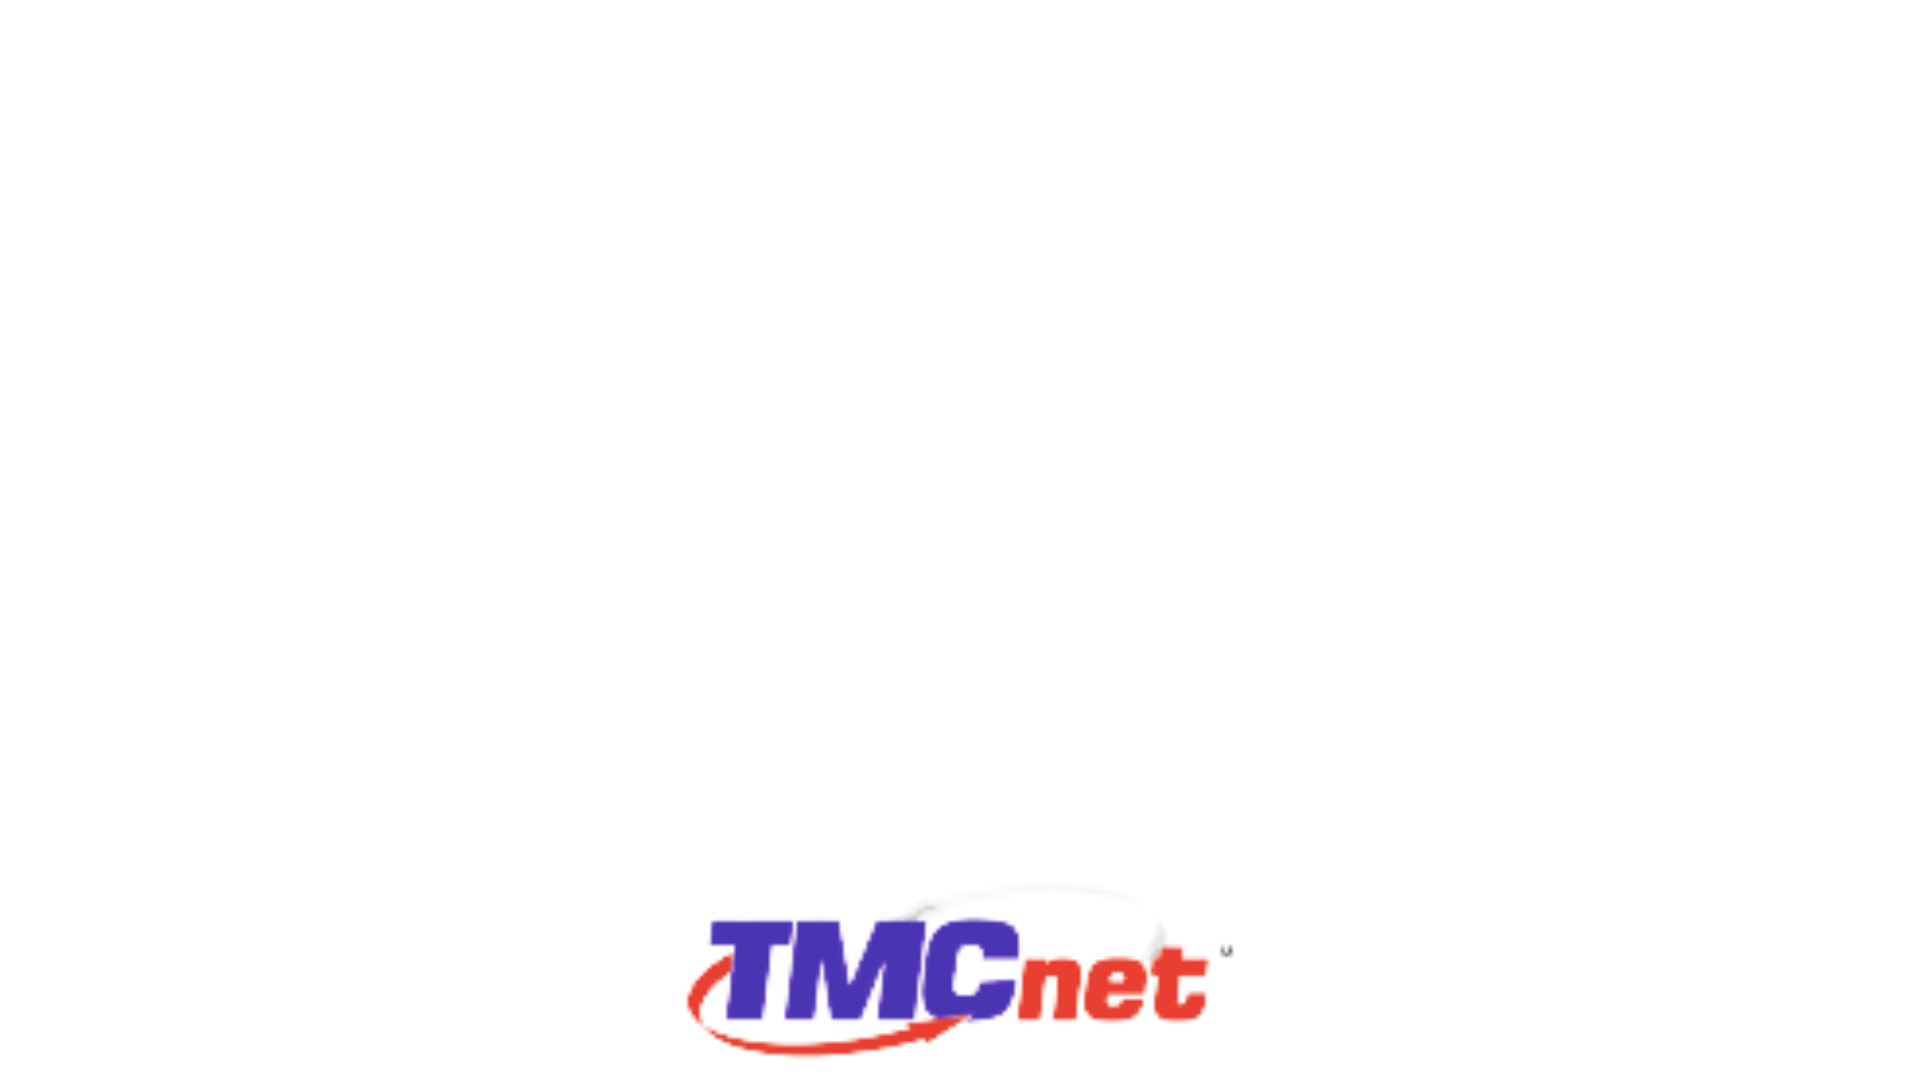 The tmc net logo is on a white background.